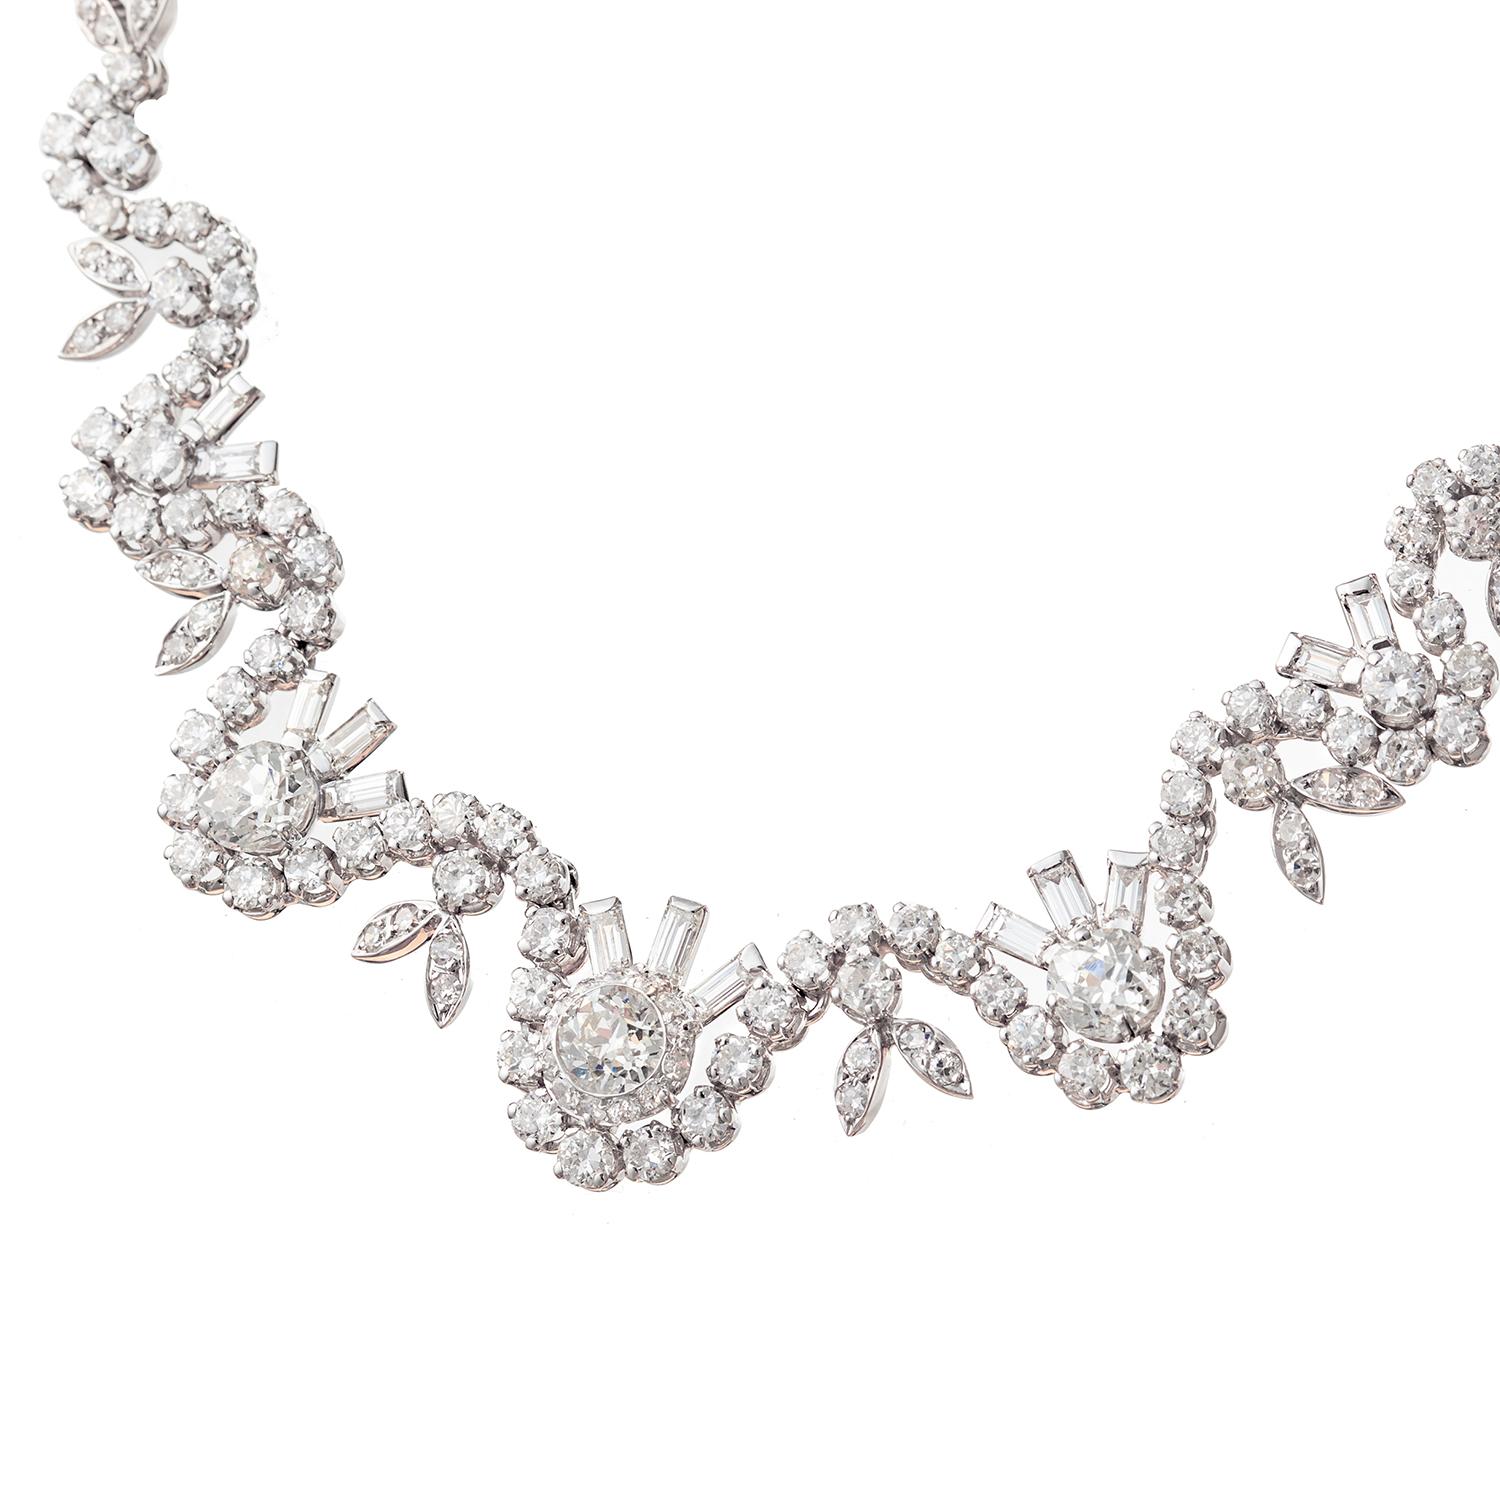 Fine handmade 18k white gold flower and leaf motif collar necklace, featuring round, baguette, old mine and old European-cut diamonds.  Diamonds altogether weighing approximately 22.00 total carats.  Stamped with French gold assay marks.